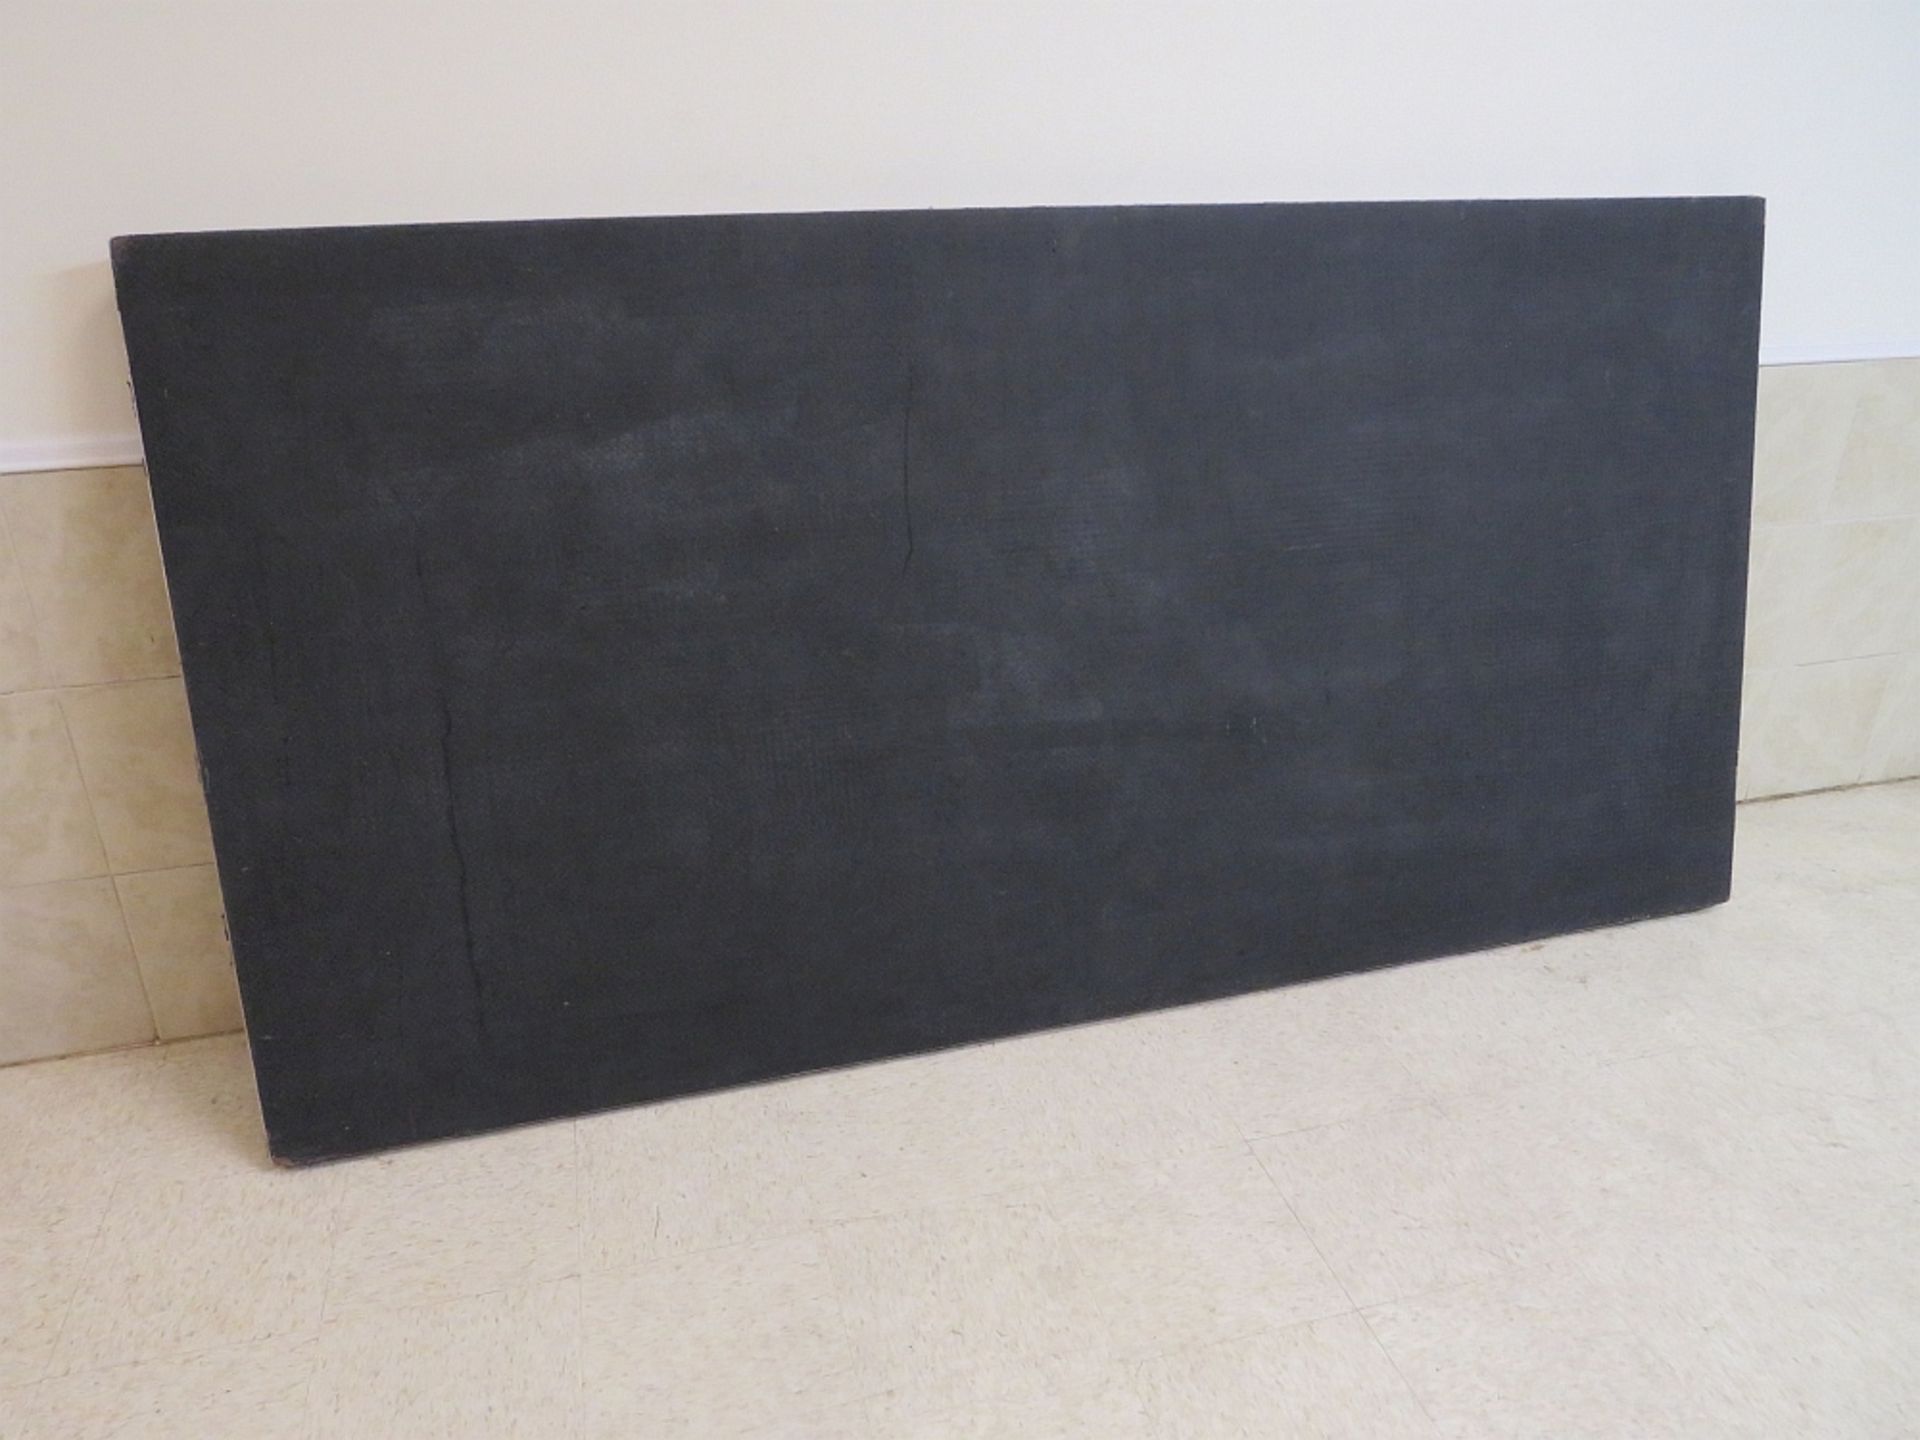 Stage Versalite - 4ft x 8ft Black Quad-Ripple surface (hard non-skid surface)